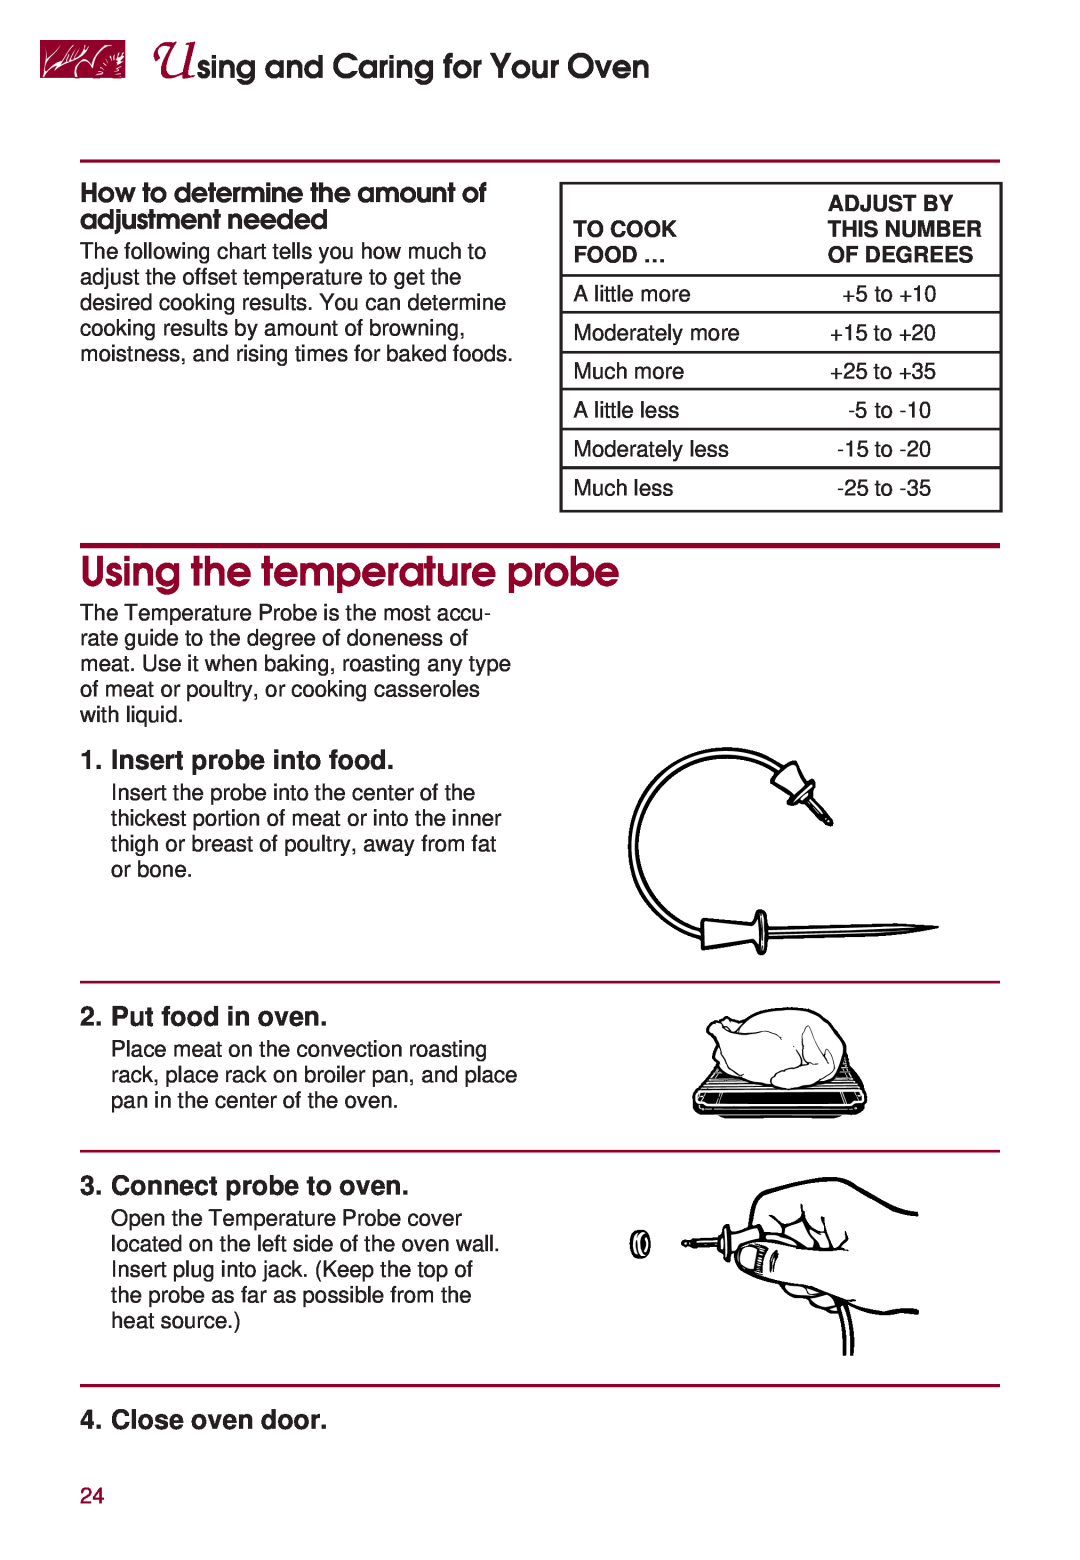 KitchenAid KERS507 Using the temperature probe, How to determine the amount of adjustment needed, Insert probe into food 